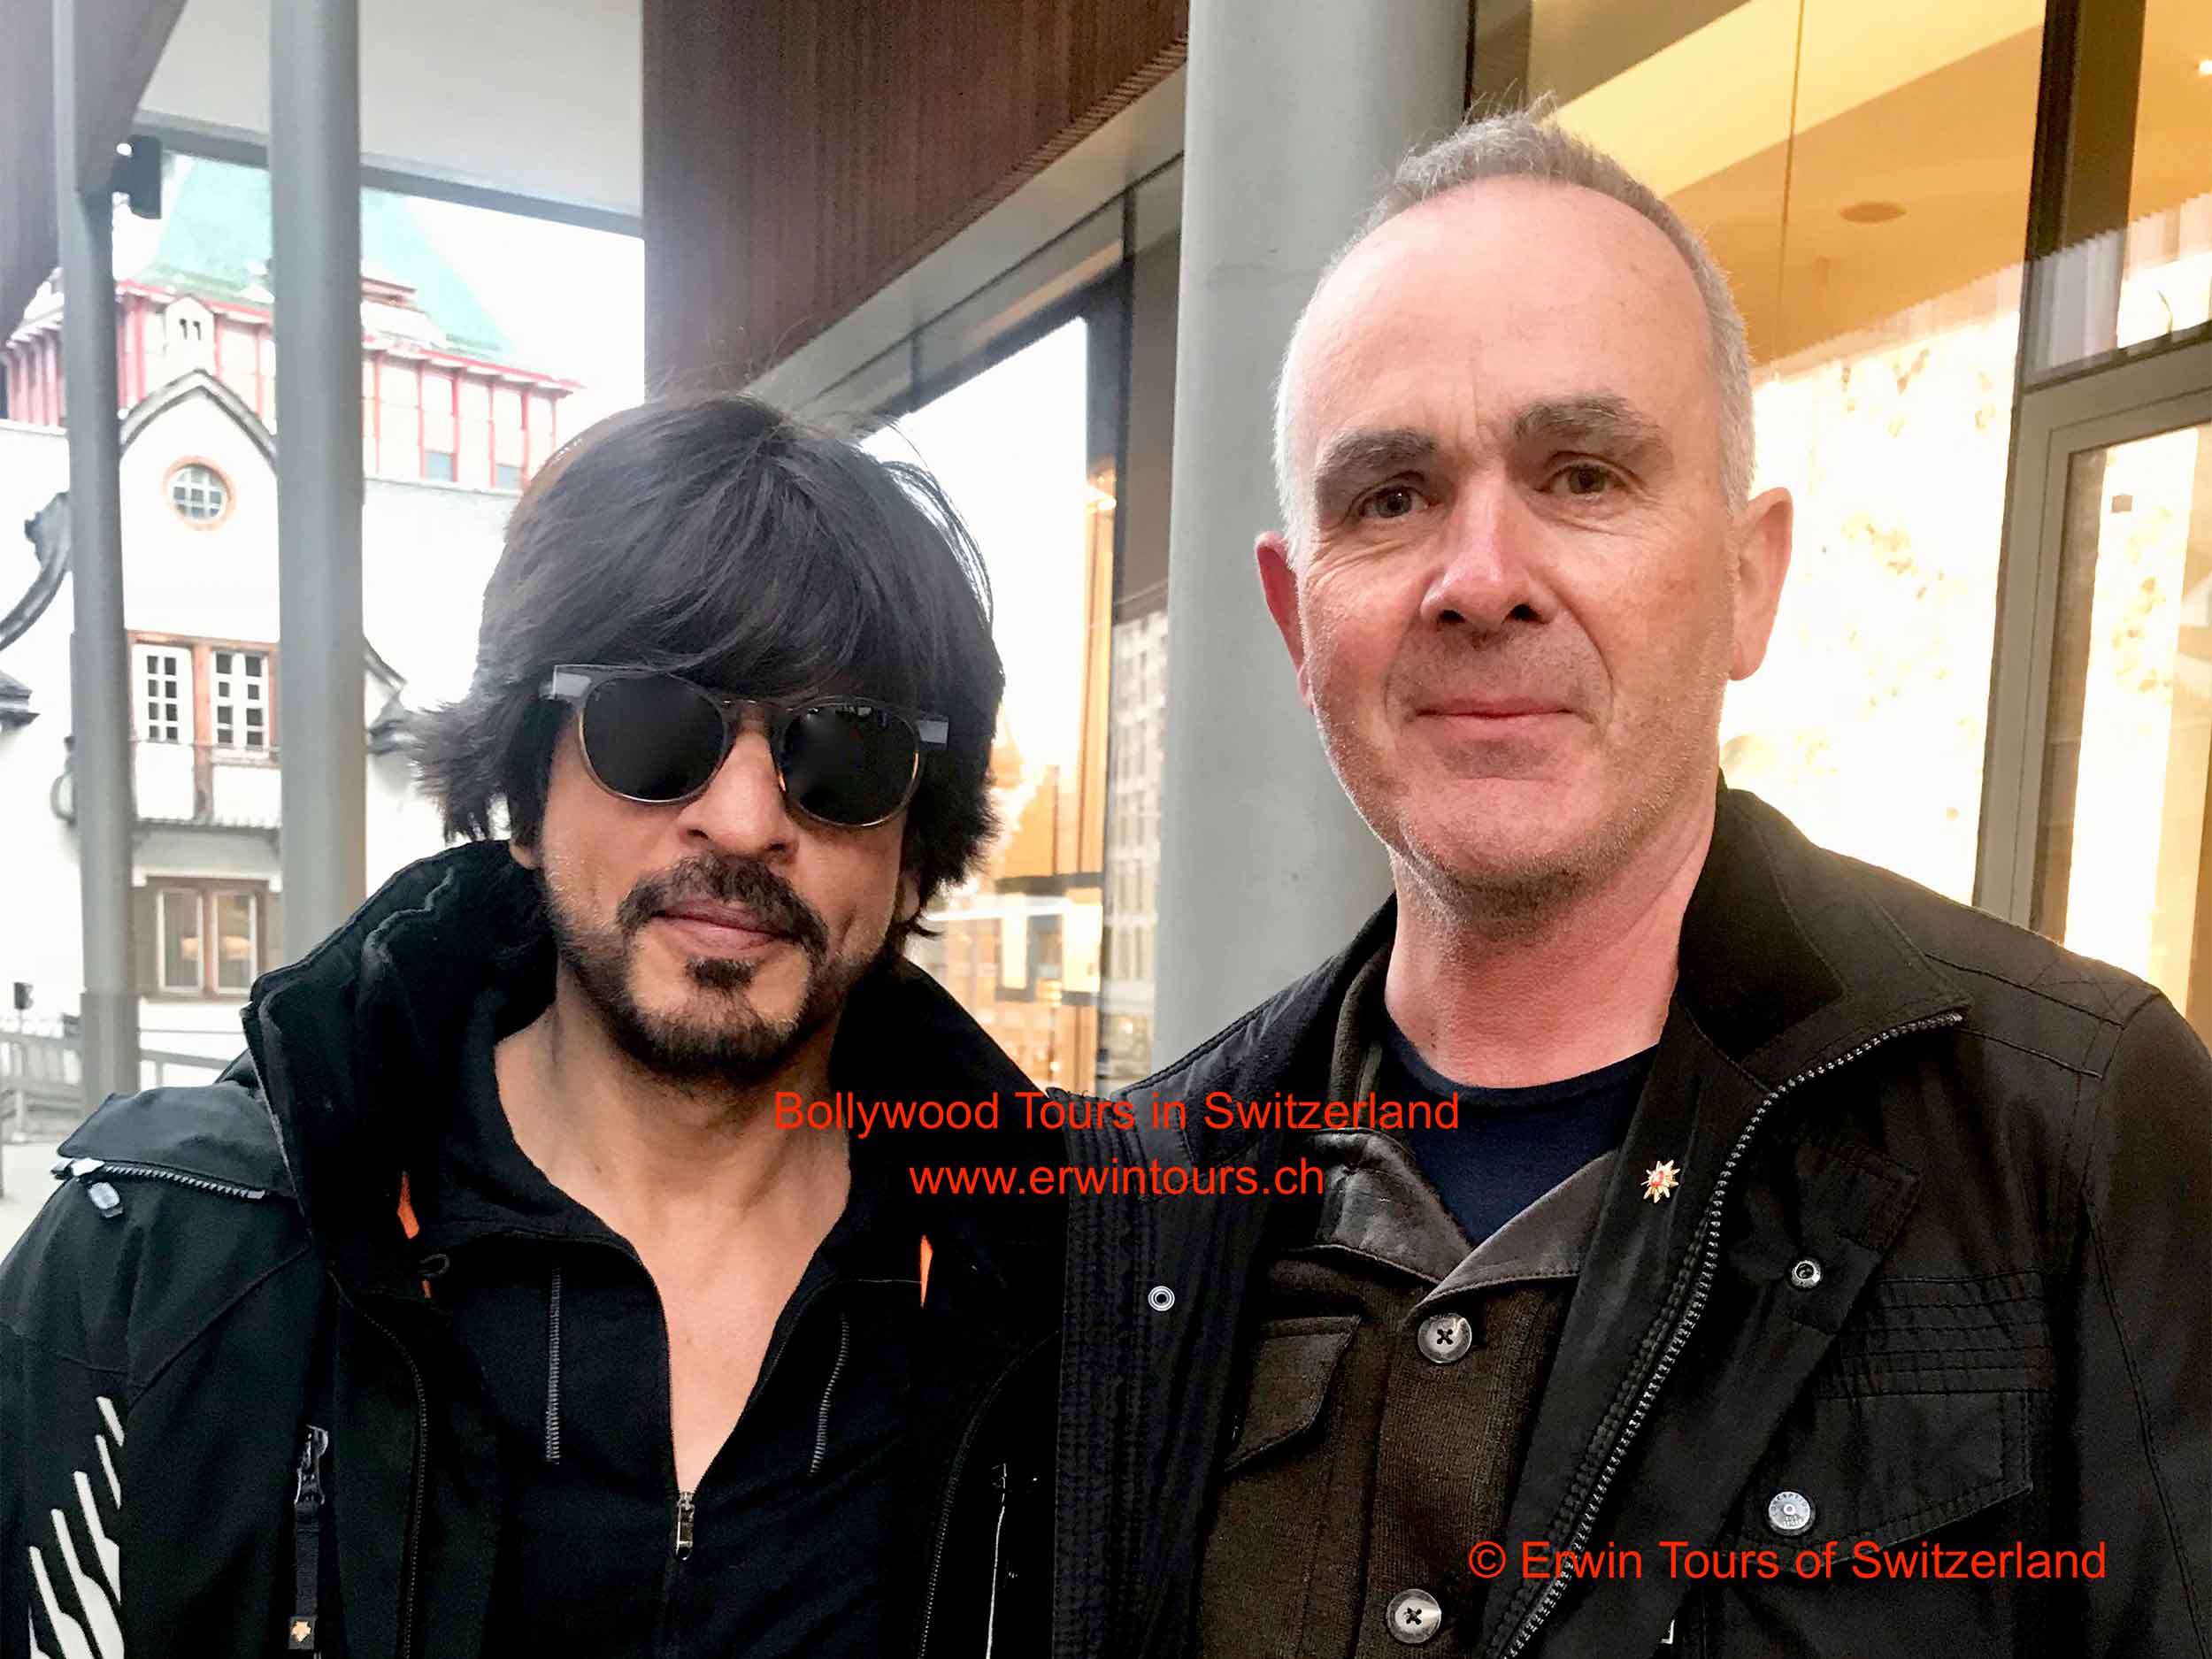 Bollywood Actor Shah Rukh Khan in Switzerland with Erwin Fässler CEO Erwin Tours of Switzerland - Bollywood Tours in Switzerland - www.erwintours.ch